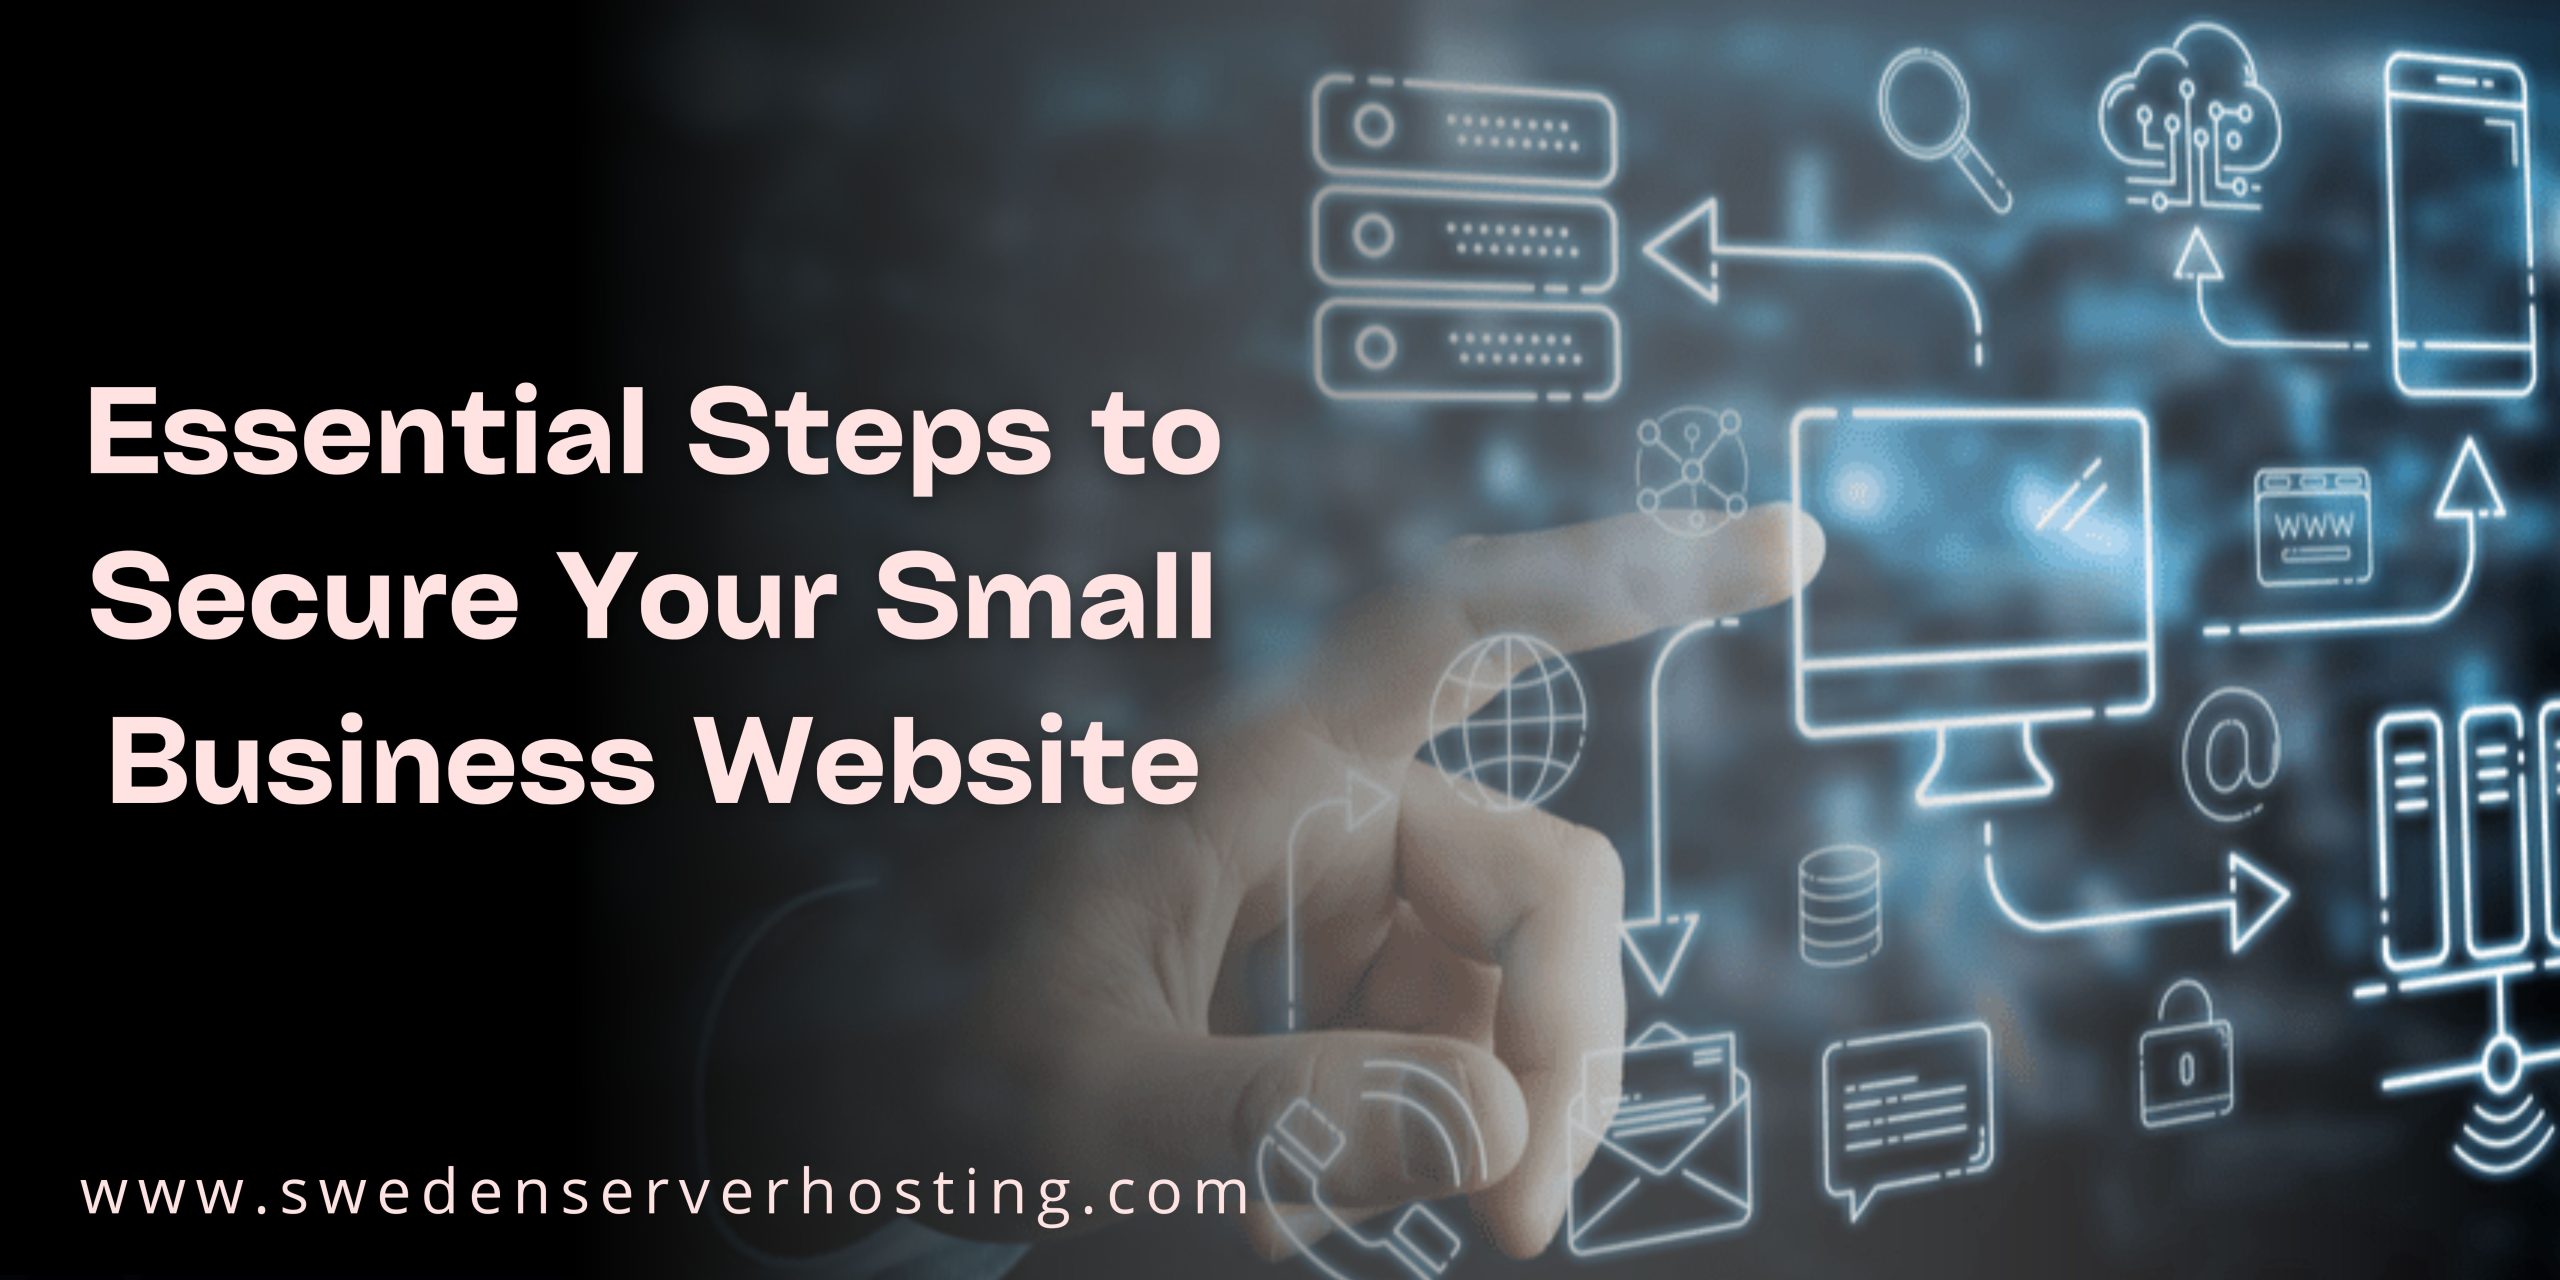 Essential Steps to Secure Your Small Business Website: Protecting Your Online Presence